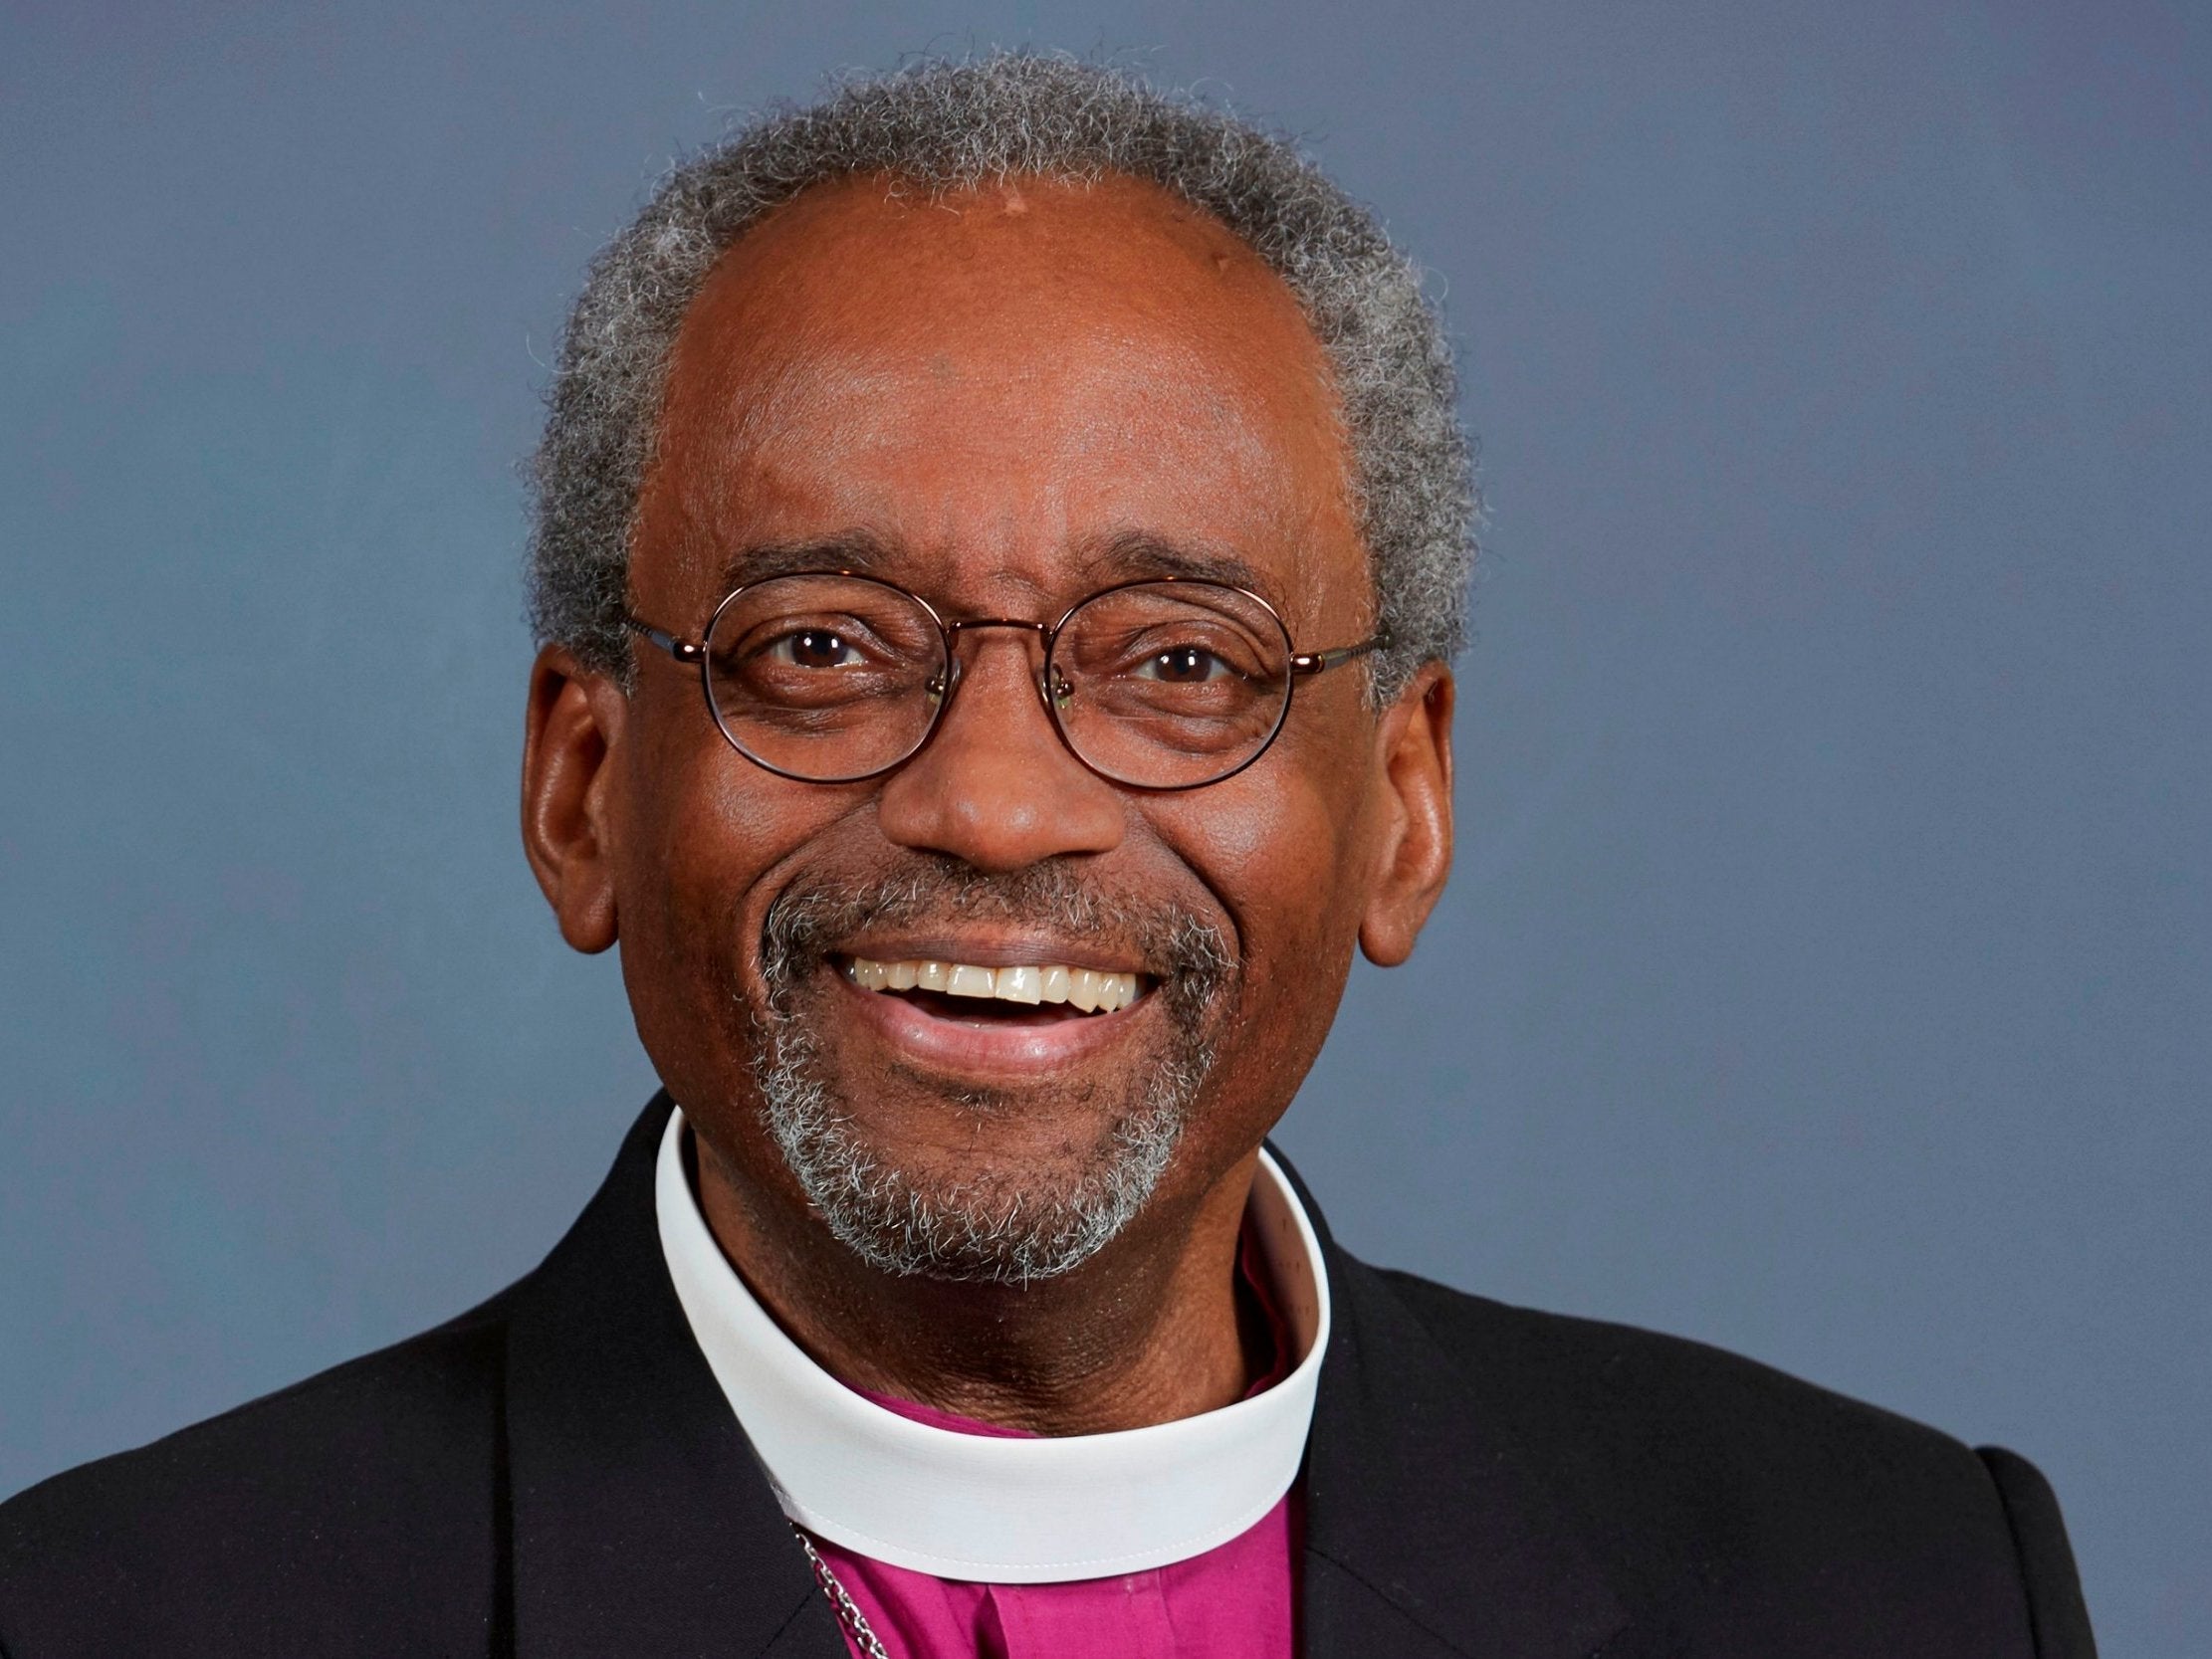 The bishop spoke at the wedding earlier this year and was lauded worldwide for his remarks